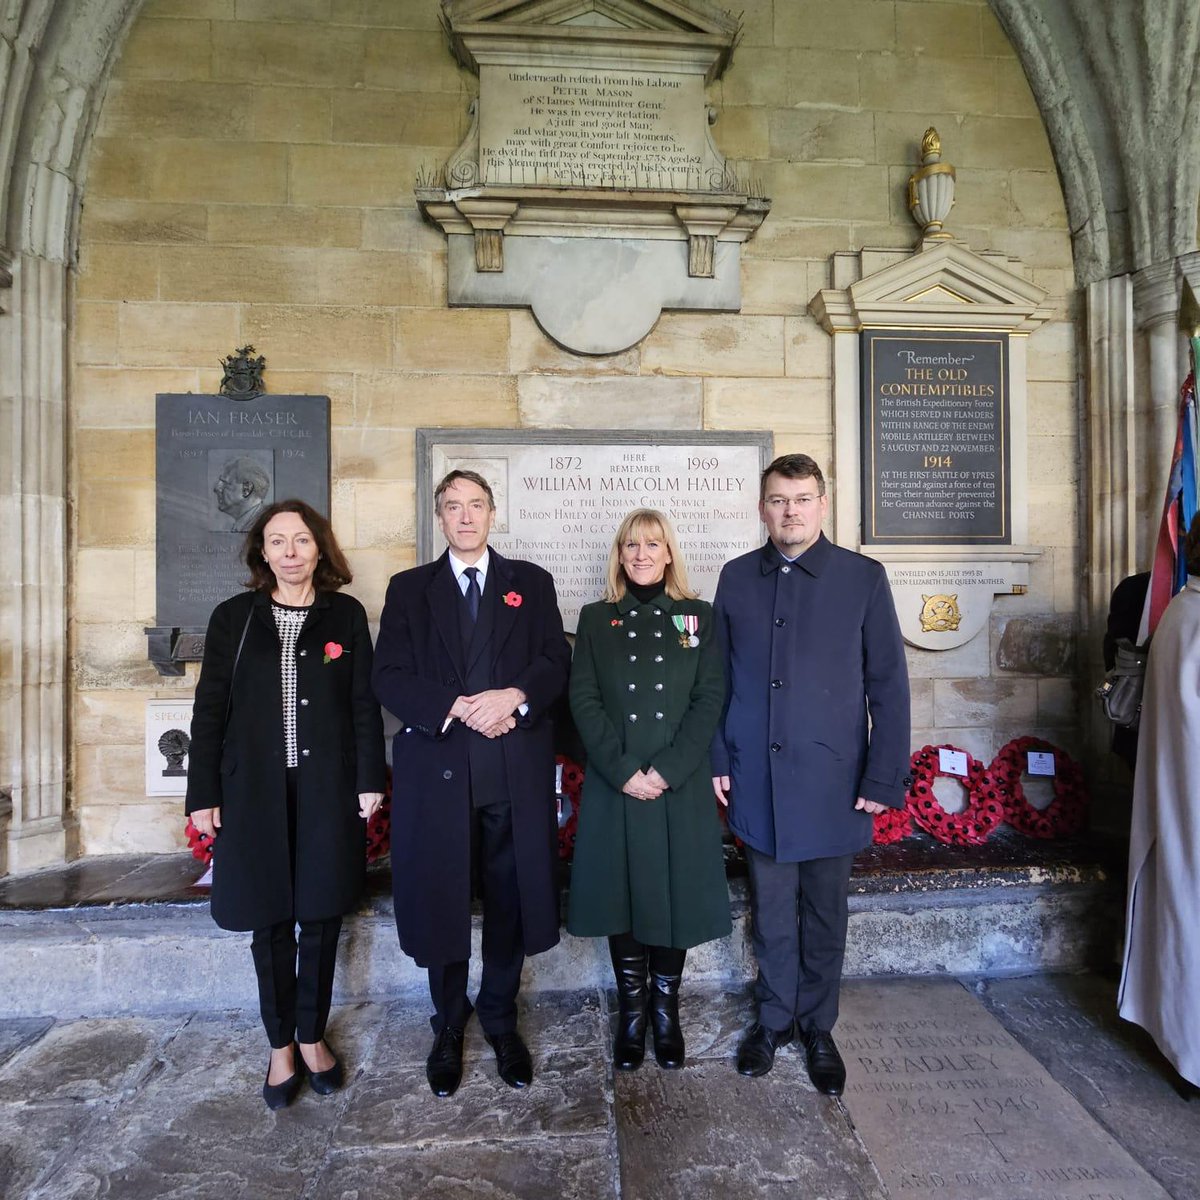 On the 30th Anniversary of the unveiling of a monumental plaque in West Cloister, Ambassador @Ondrejcsak visited @wabbey to commemorate the Czechoslovak airmen, soldiers and military personnel who fought in the #WWII. Thanks to @mafcsv for organising the service.